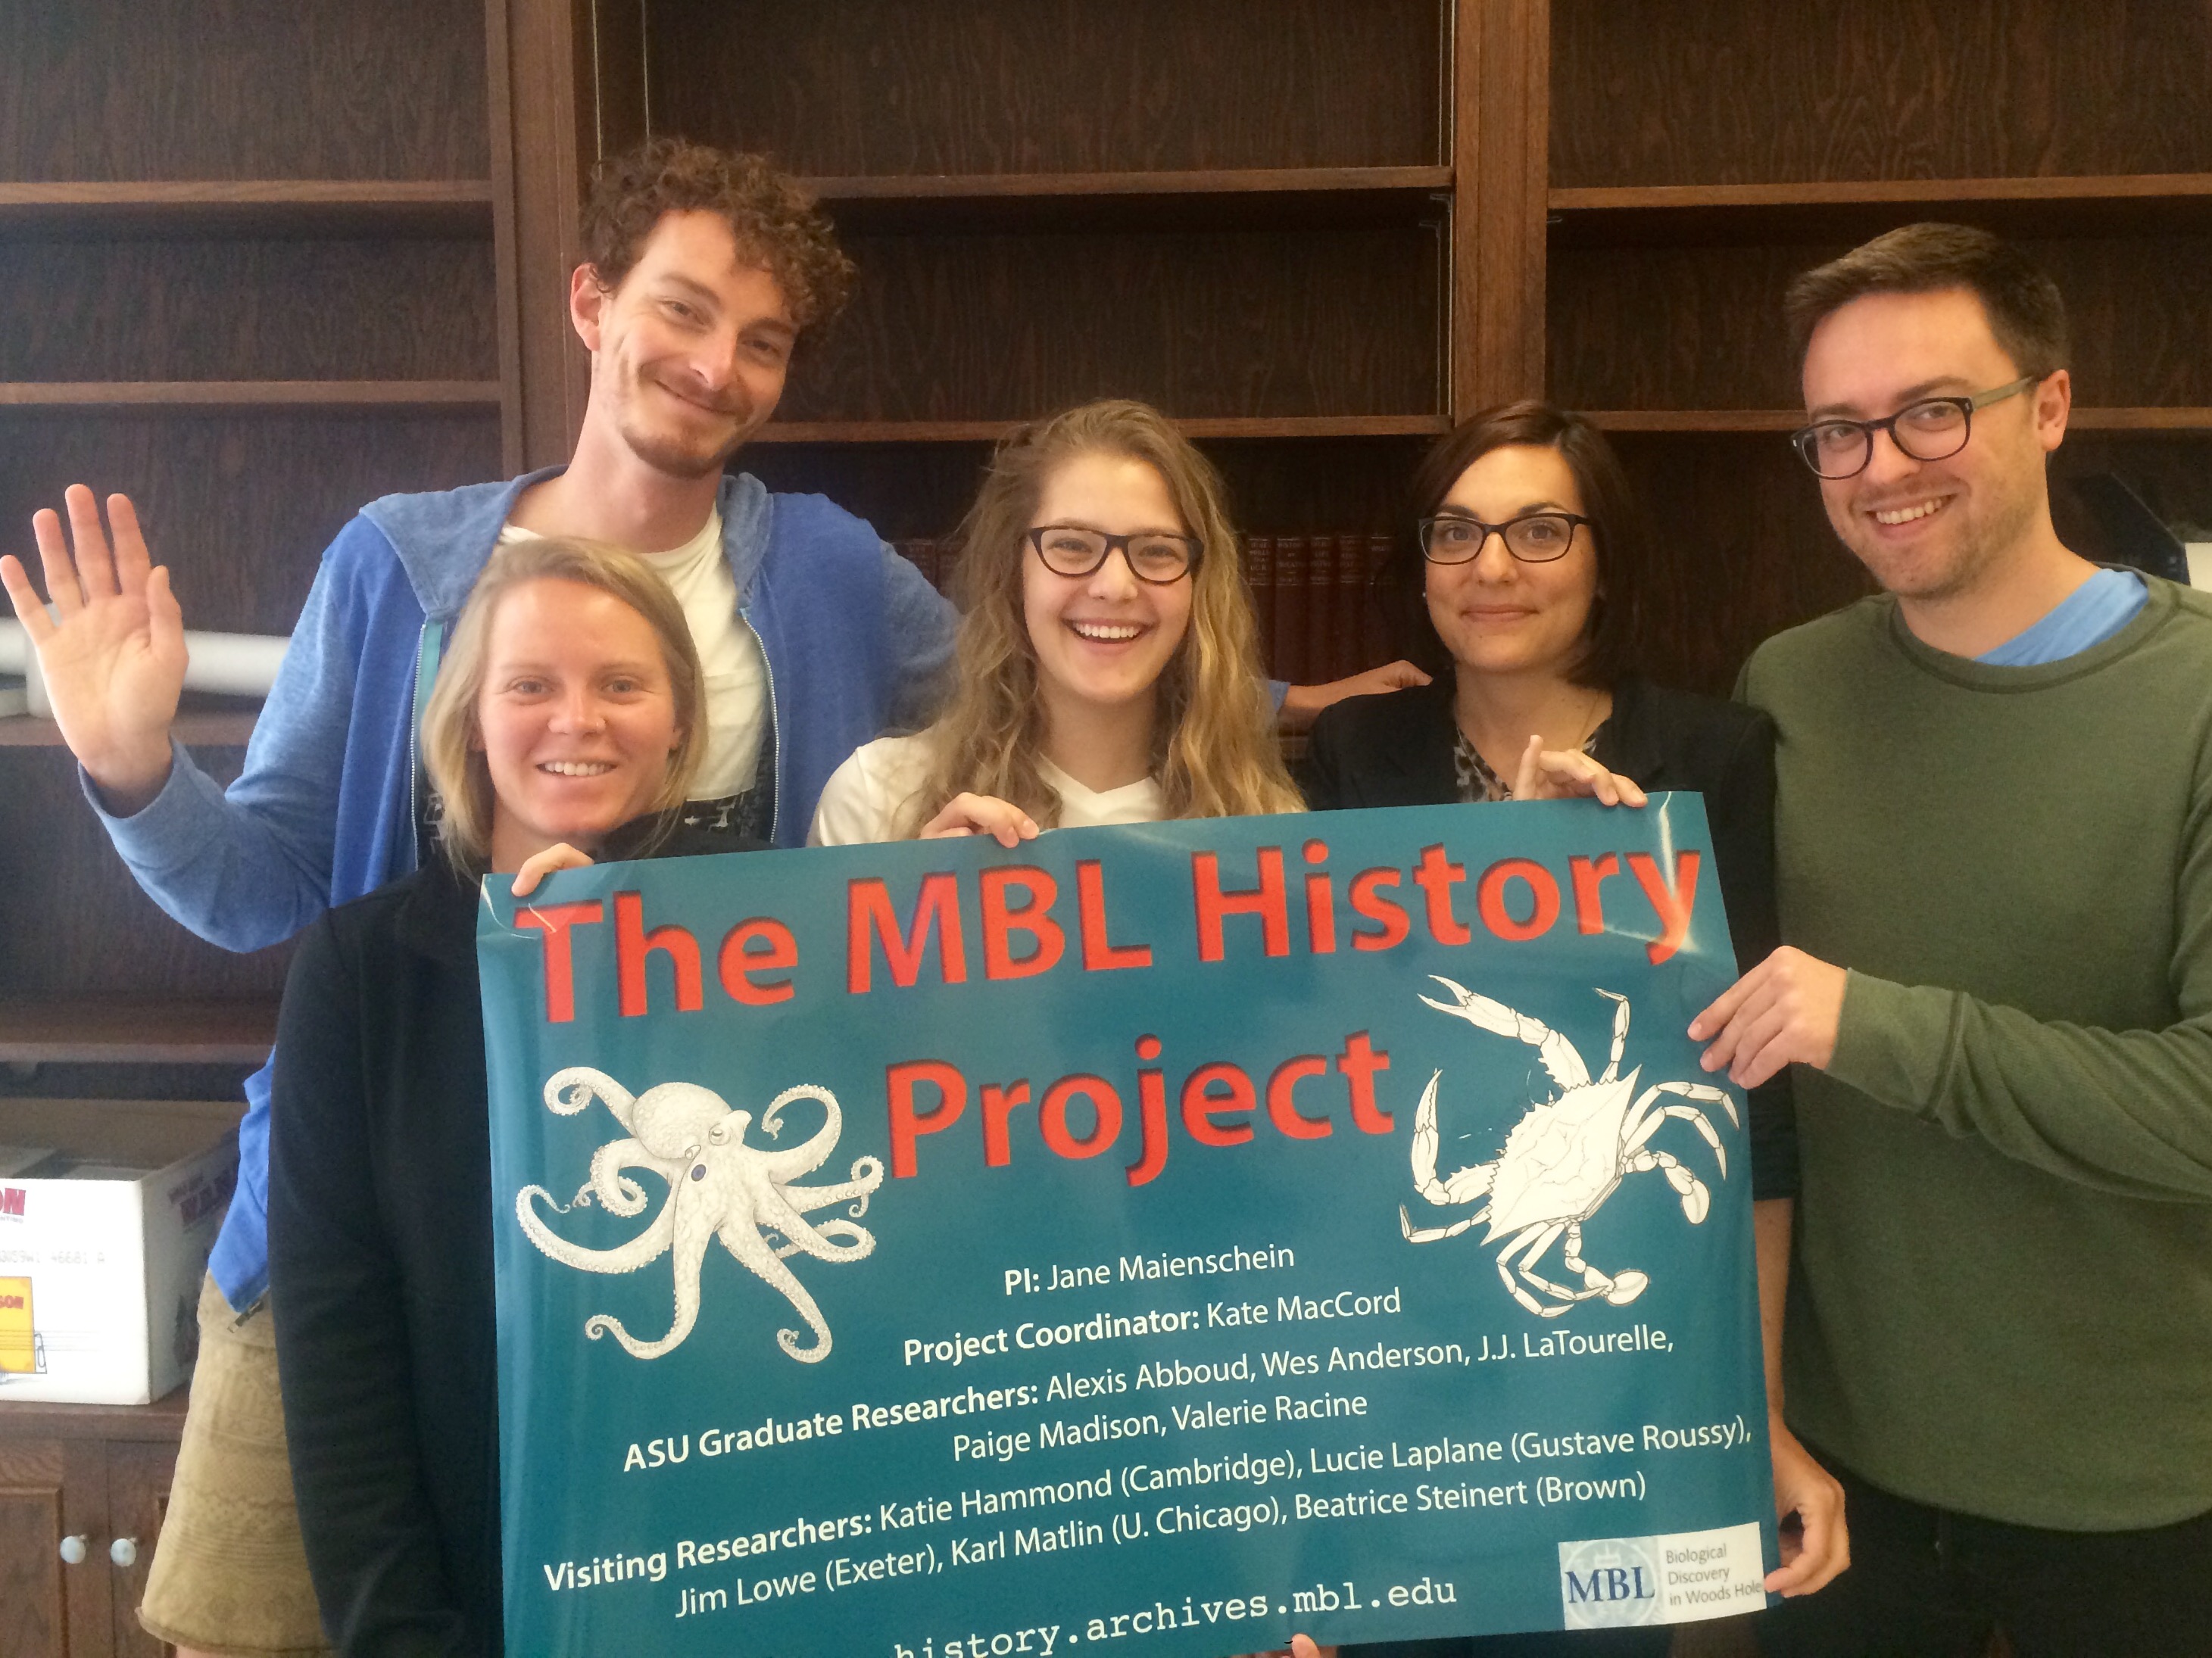 Arizona State University students and members of the MBL History Project team. From left to right: Jonathan (JJ) Latourelle, Paige Madison, Alexis Abboud, Valerie Racine, and Wesley Anderson.